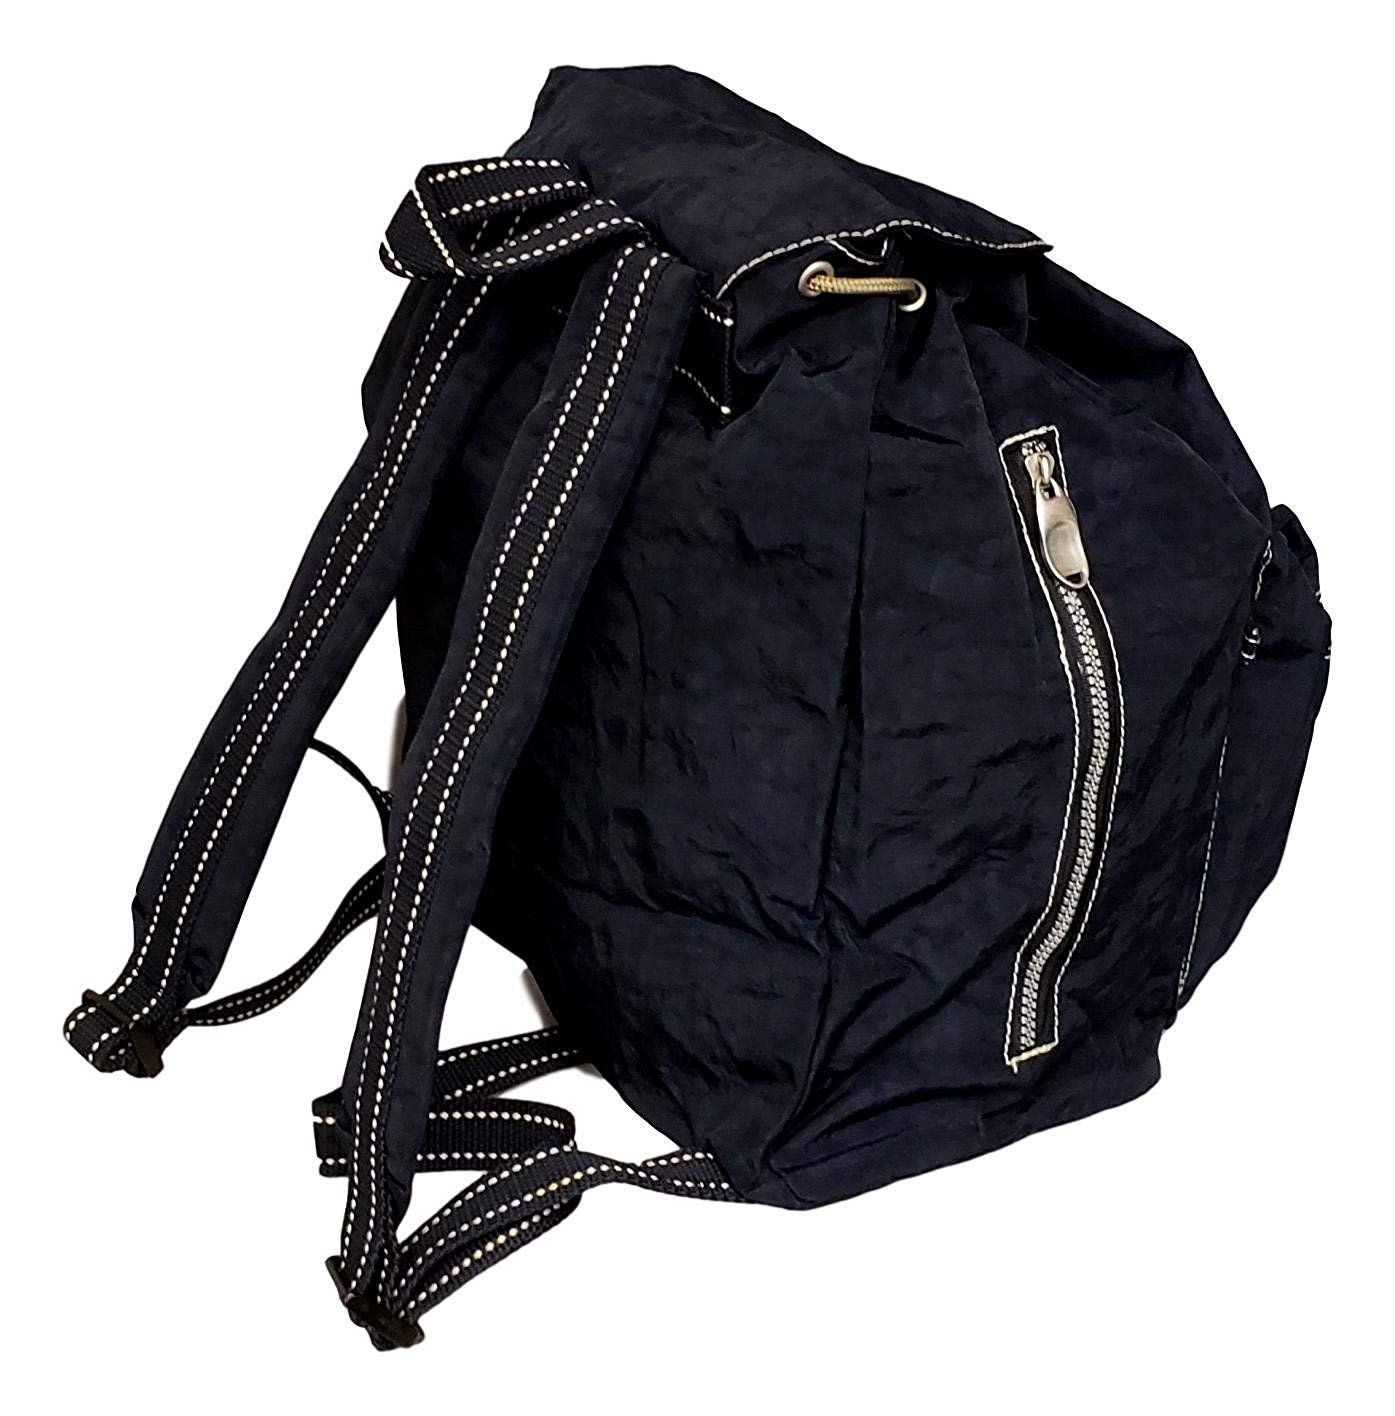 Lightweight Drawstring Flap Over Campus Backpack Blue - image 2 of 4